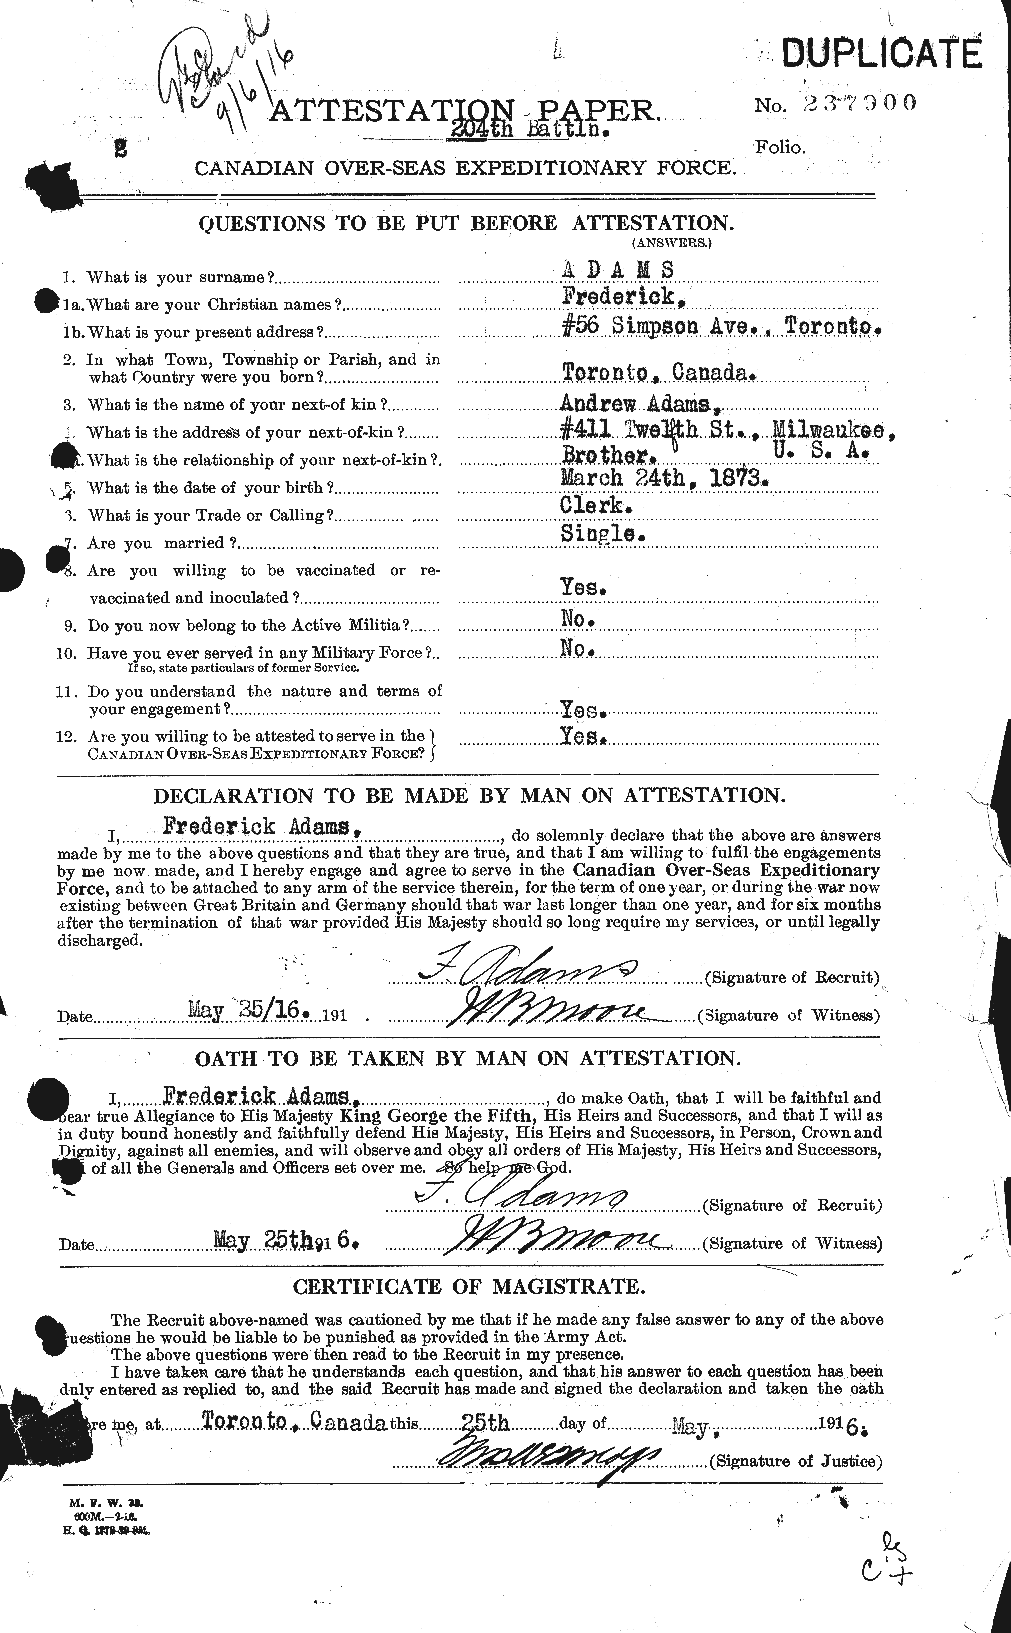 Personnel Records of the First World War - CEF 202686a